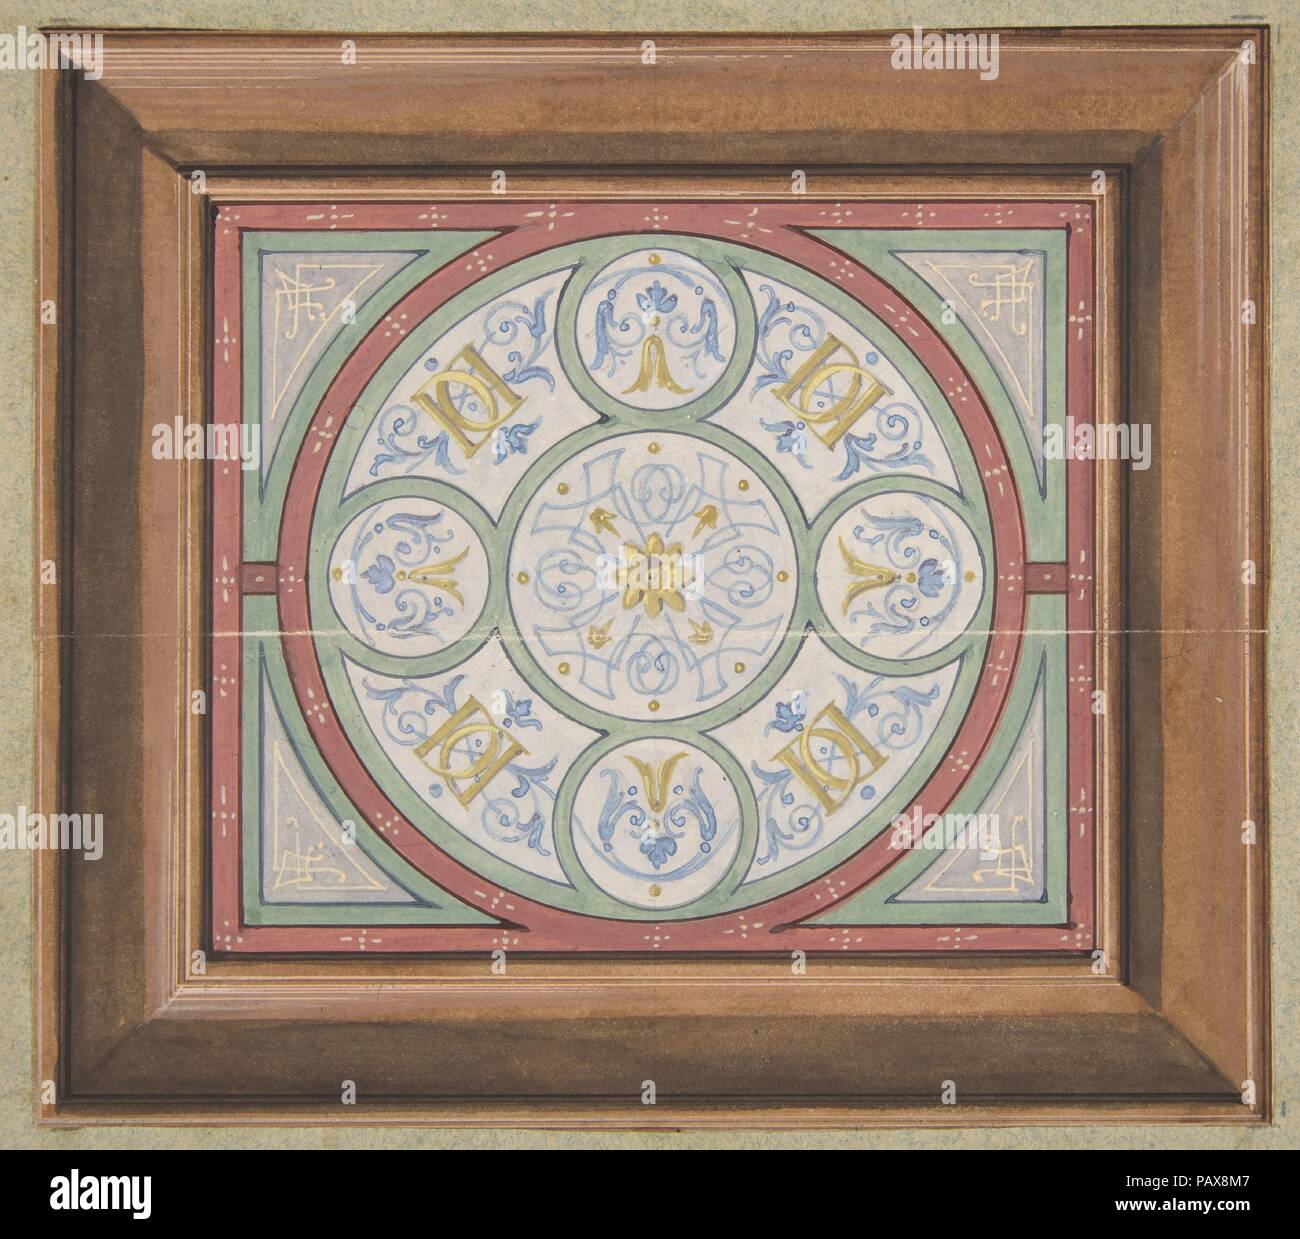 Design for painted decoration of a ceiling incorporating interwined initials: DD. Artist: Jules-Edmond-Charles Lachaise (French, died 1897); Eugène-Pierre Gourdet (French, born Paris, 1820-1889). Dimensions: Overall: 10 11/16 x 8 1/4 in. (27.1 x 21 cm)  image: 7 1/16 x 6 1/4 in. (17.9 x 15.8 cm). Date: second half 19th century. Museum: Metropolitan Museum of Art, New York, USA. Stock Photo